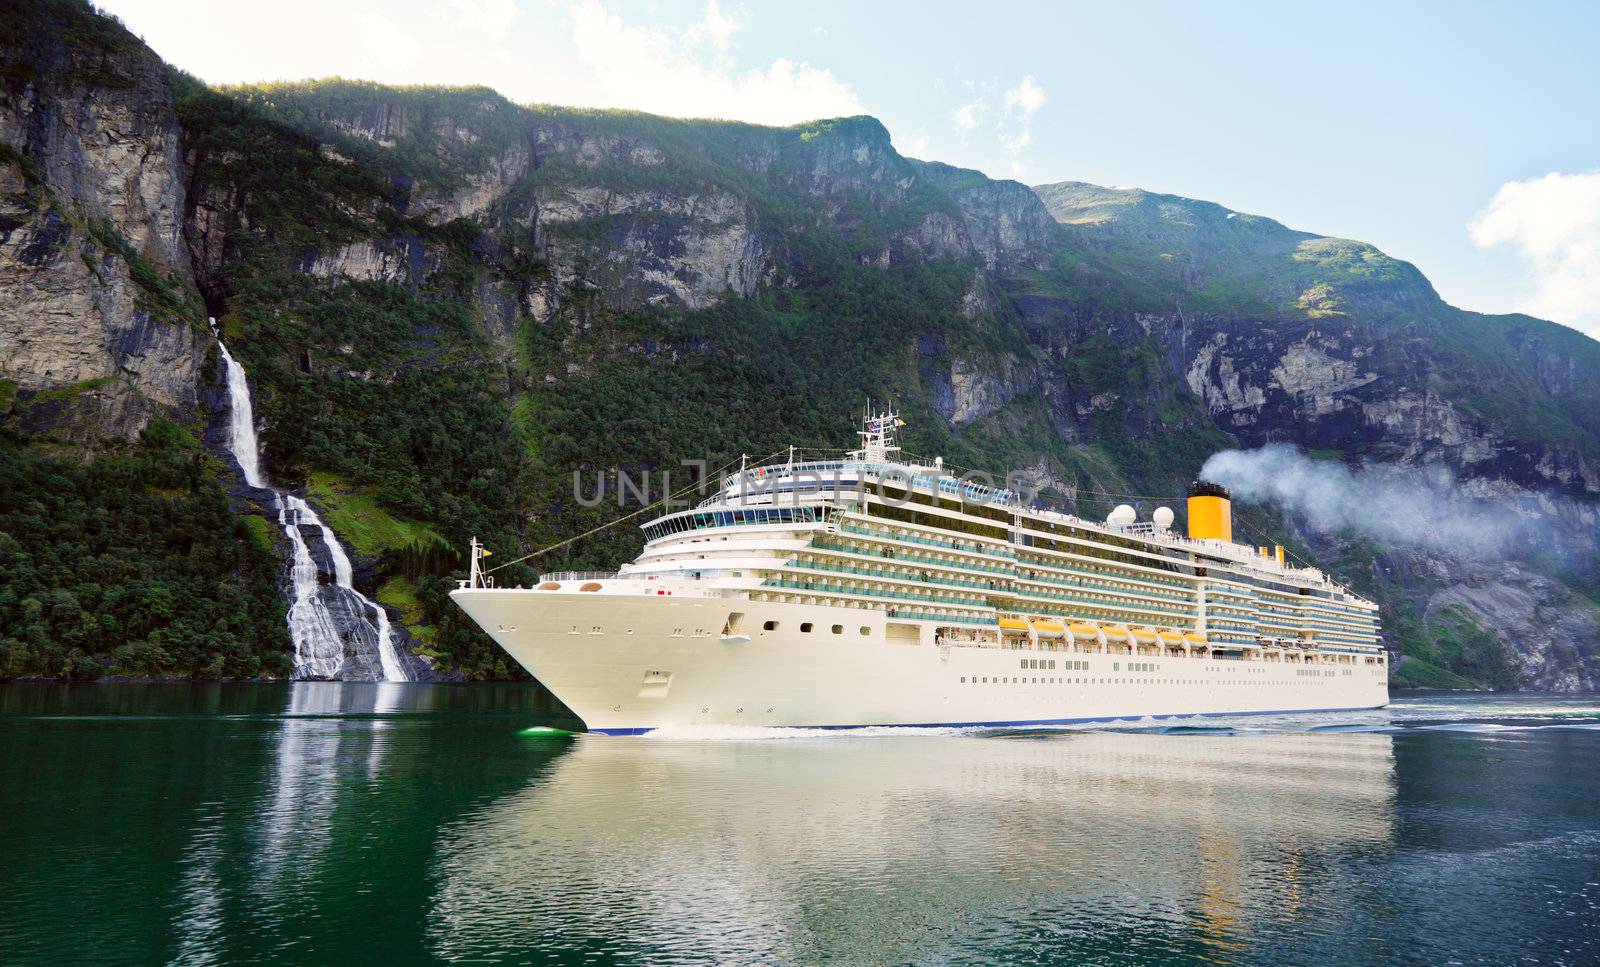 Cruise ship in fiord by naumoid